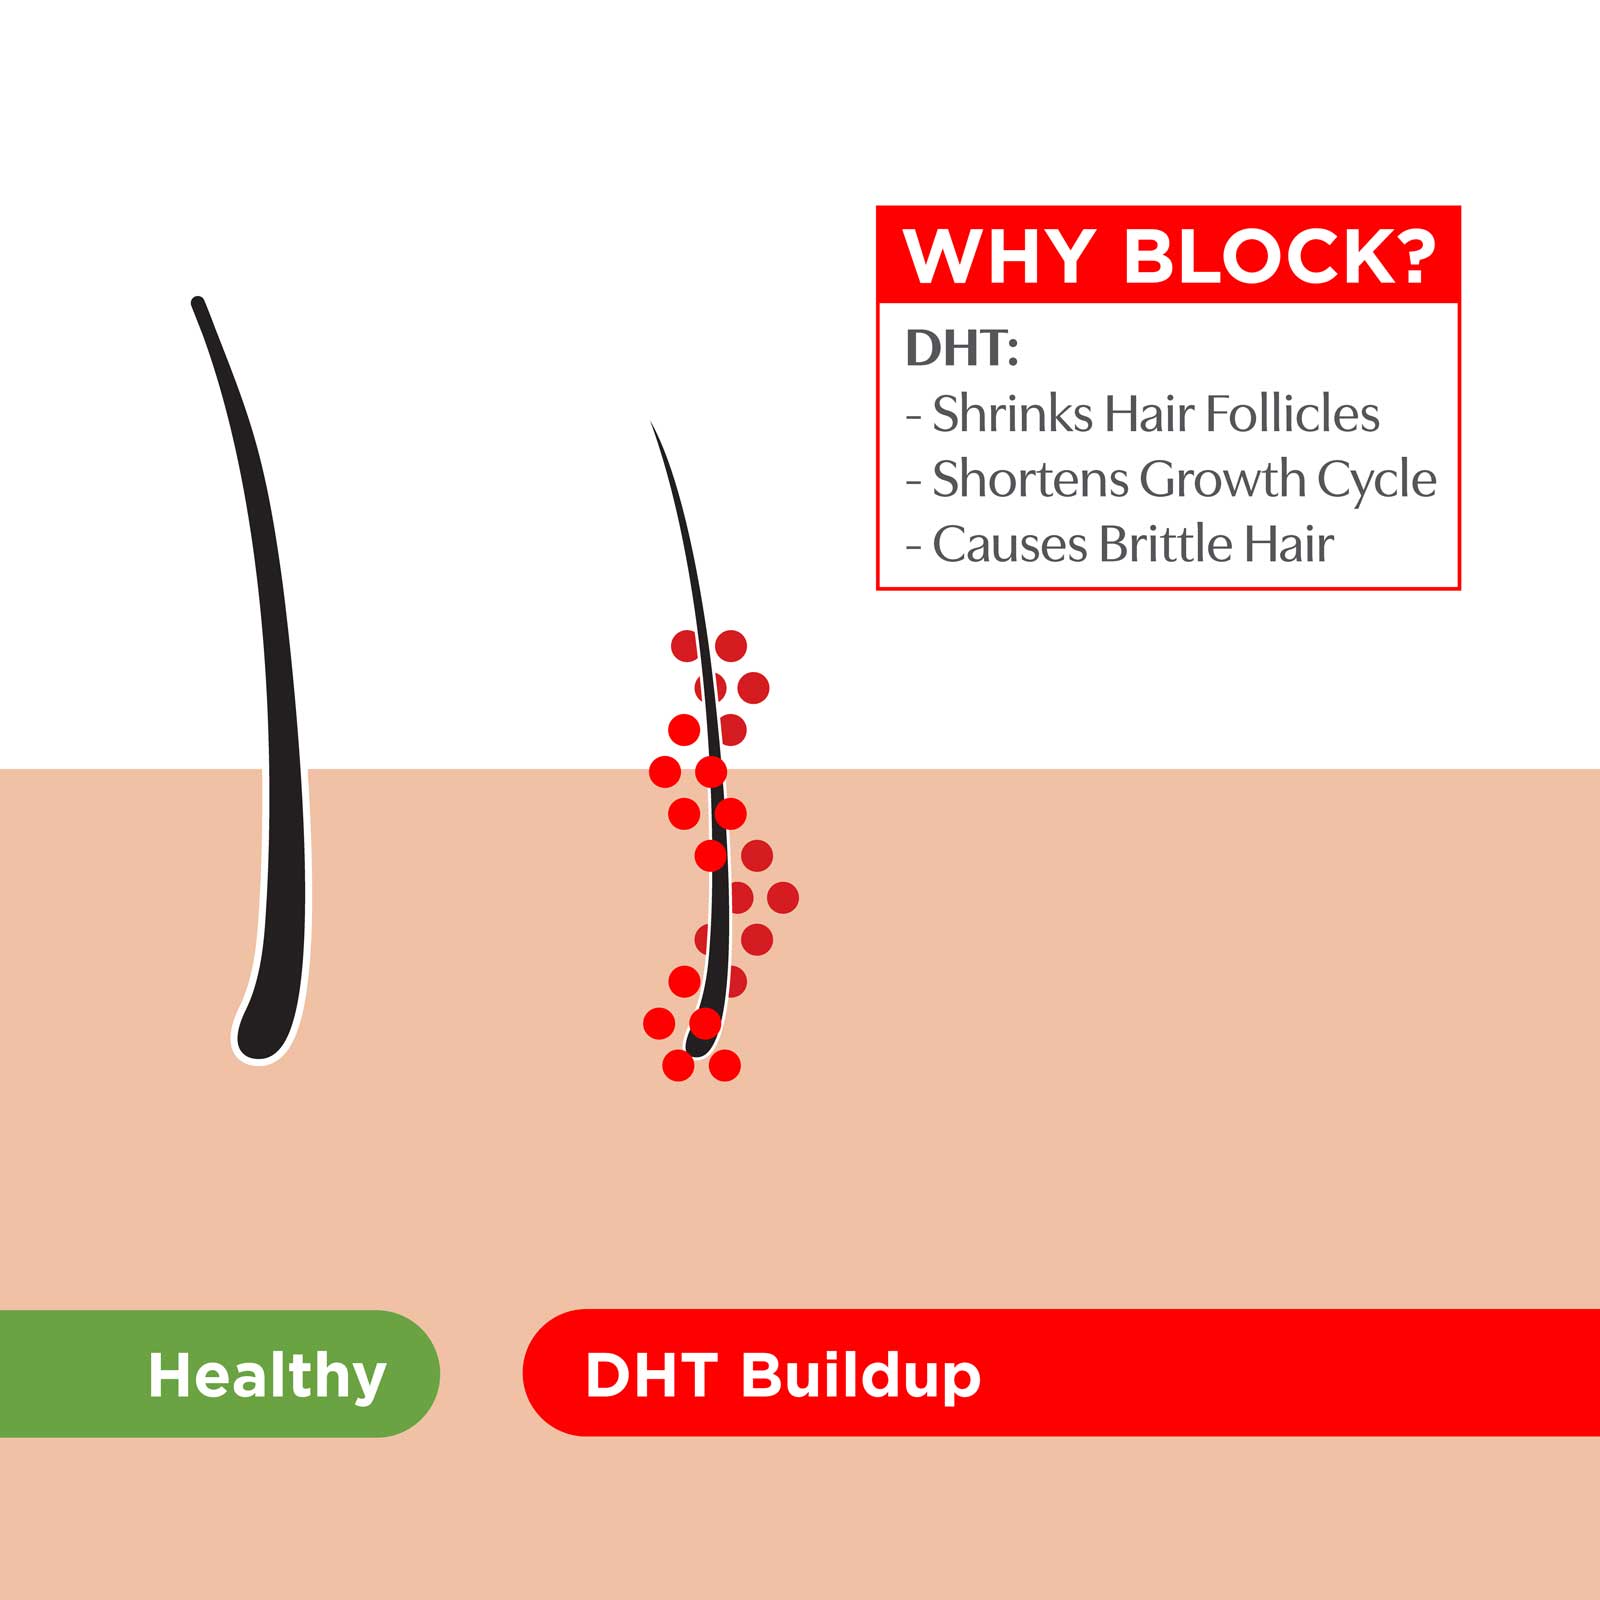 6 Foods That May Block DHT and Fight Hair Loss